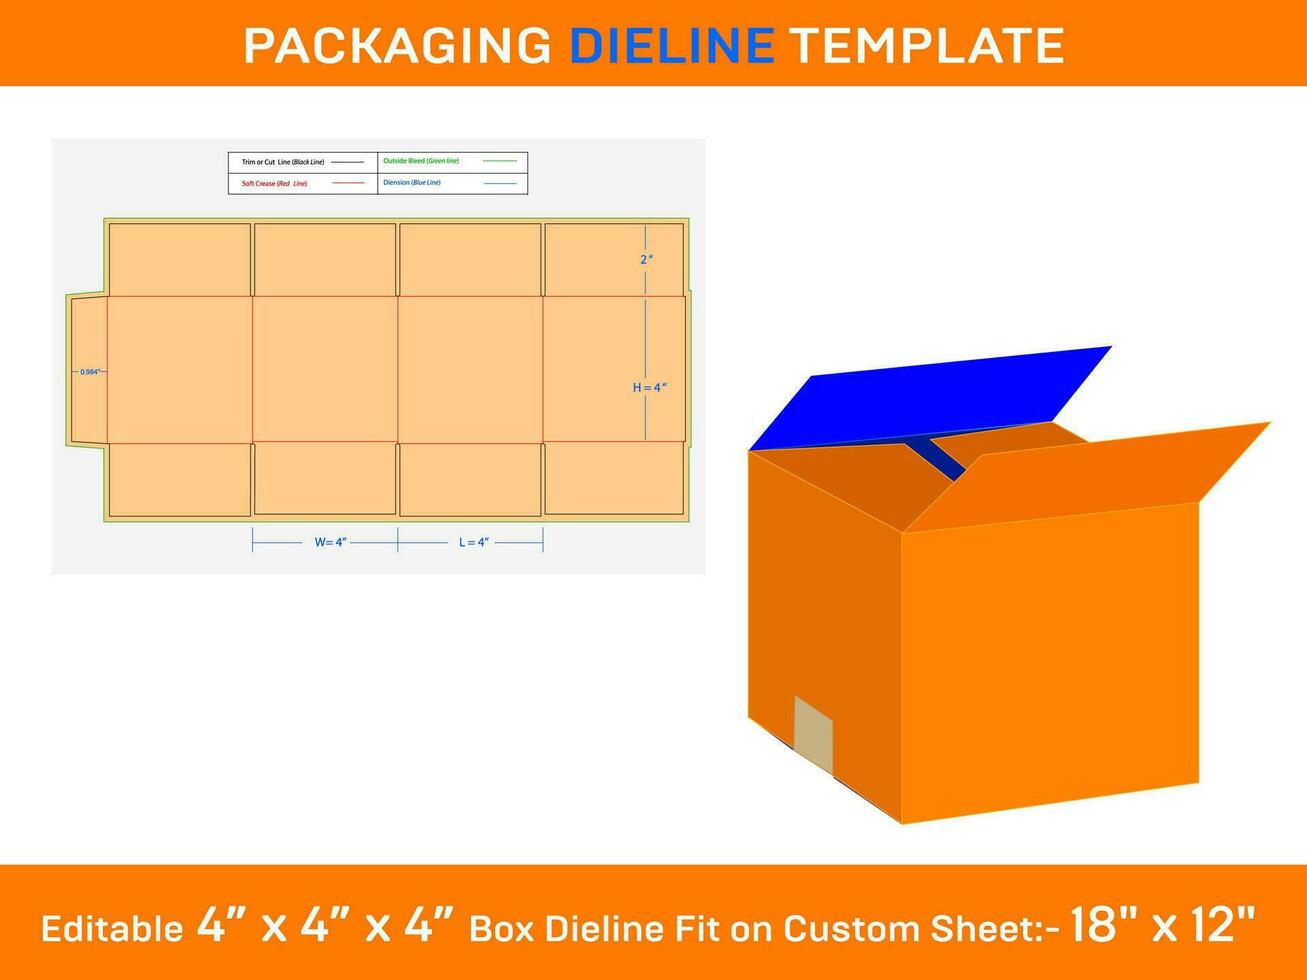 Paperboard Carton Box, Dieline Template, SVG, Ai, EPS, PDF, DXF,  JPG, PNG vector